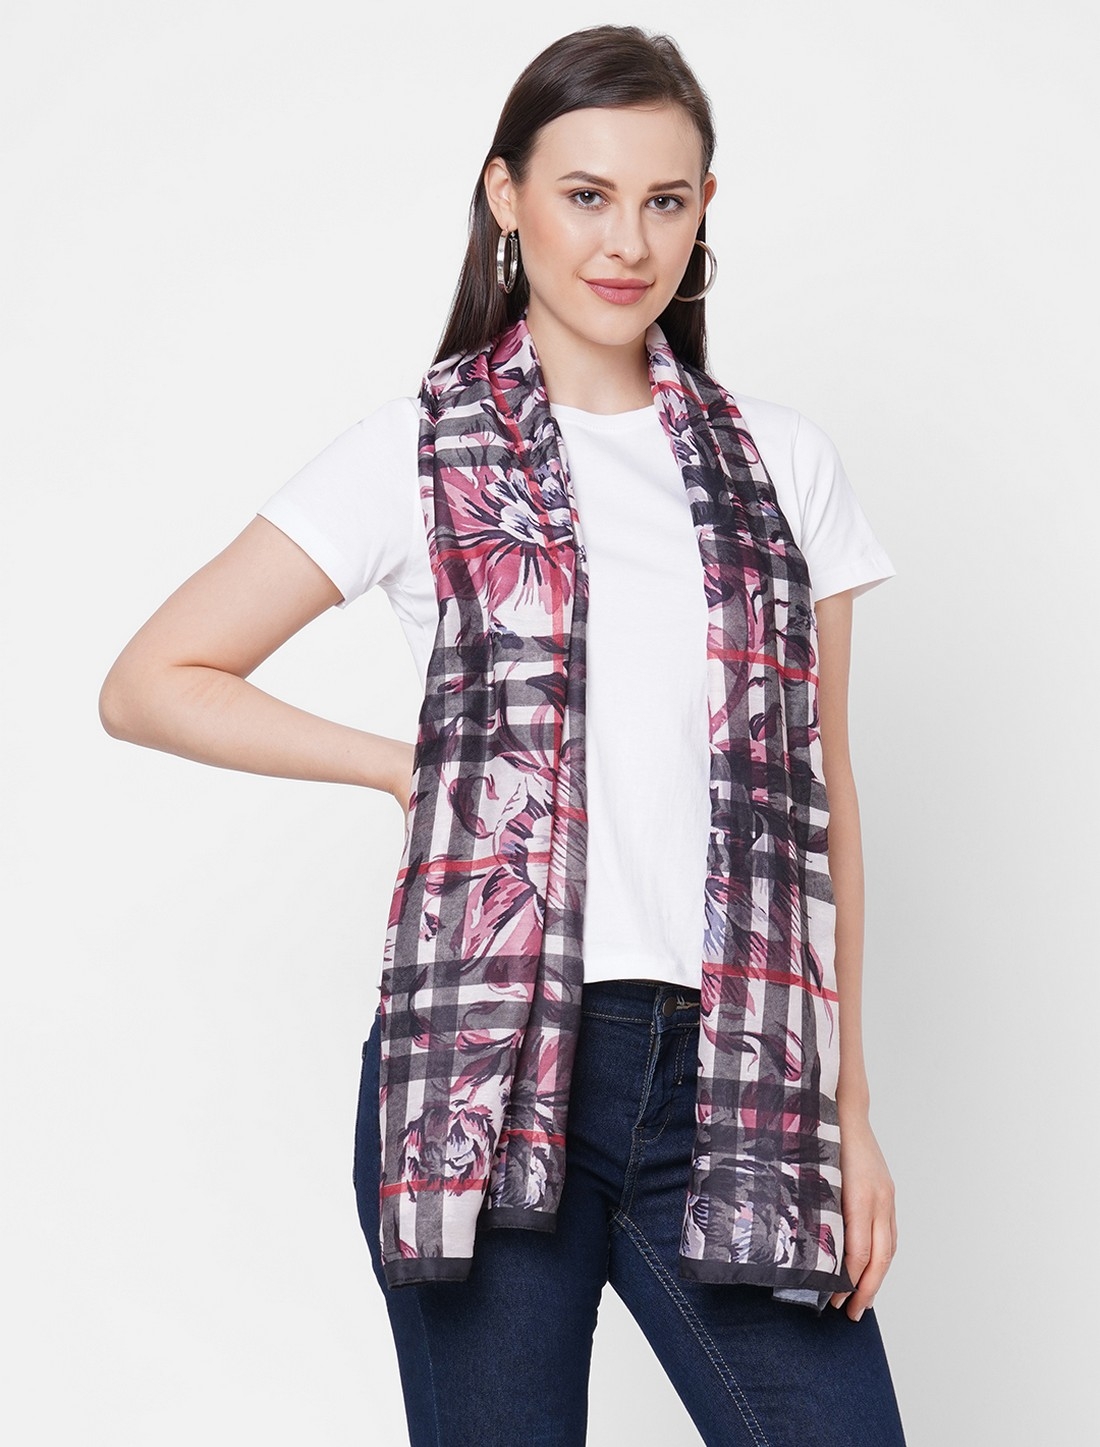 Get Wrapped | Get Wrapped Multi-Coloured Digital Printed Scarf in Soft Wool Feel Fabric for Women